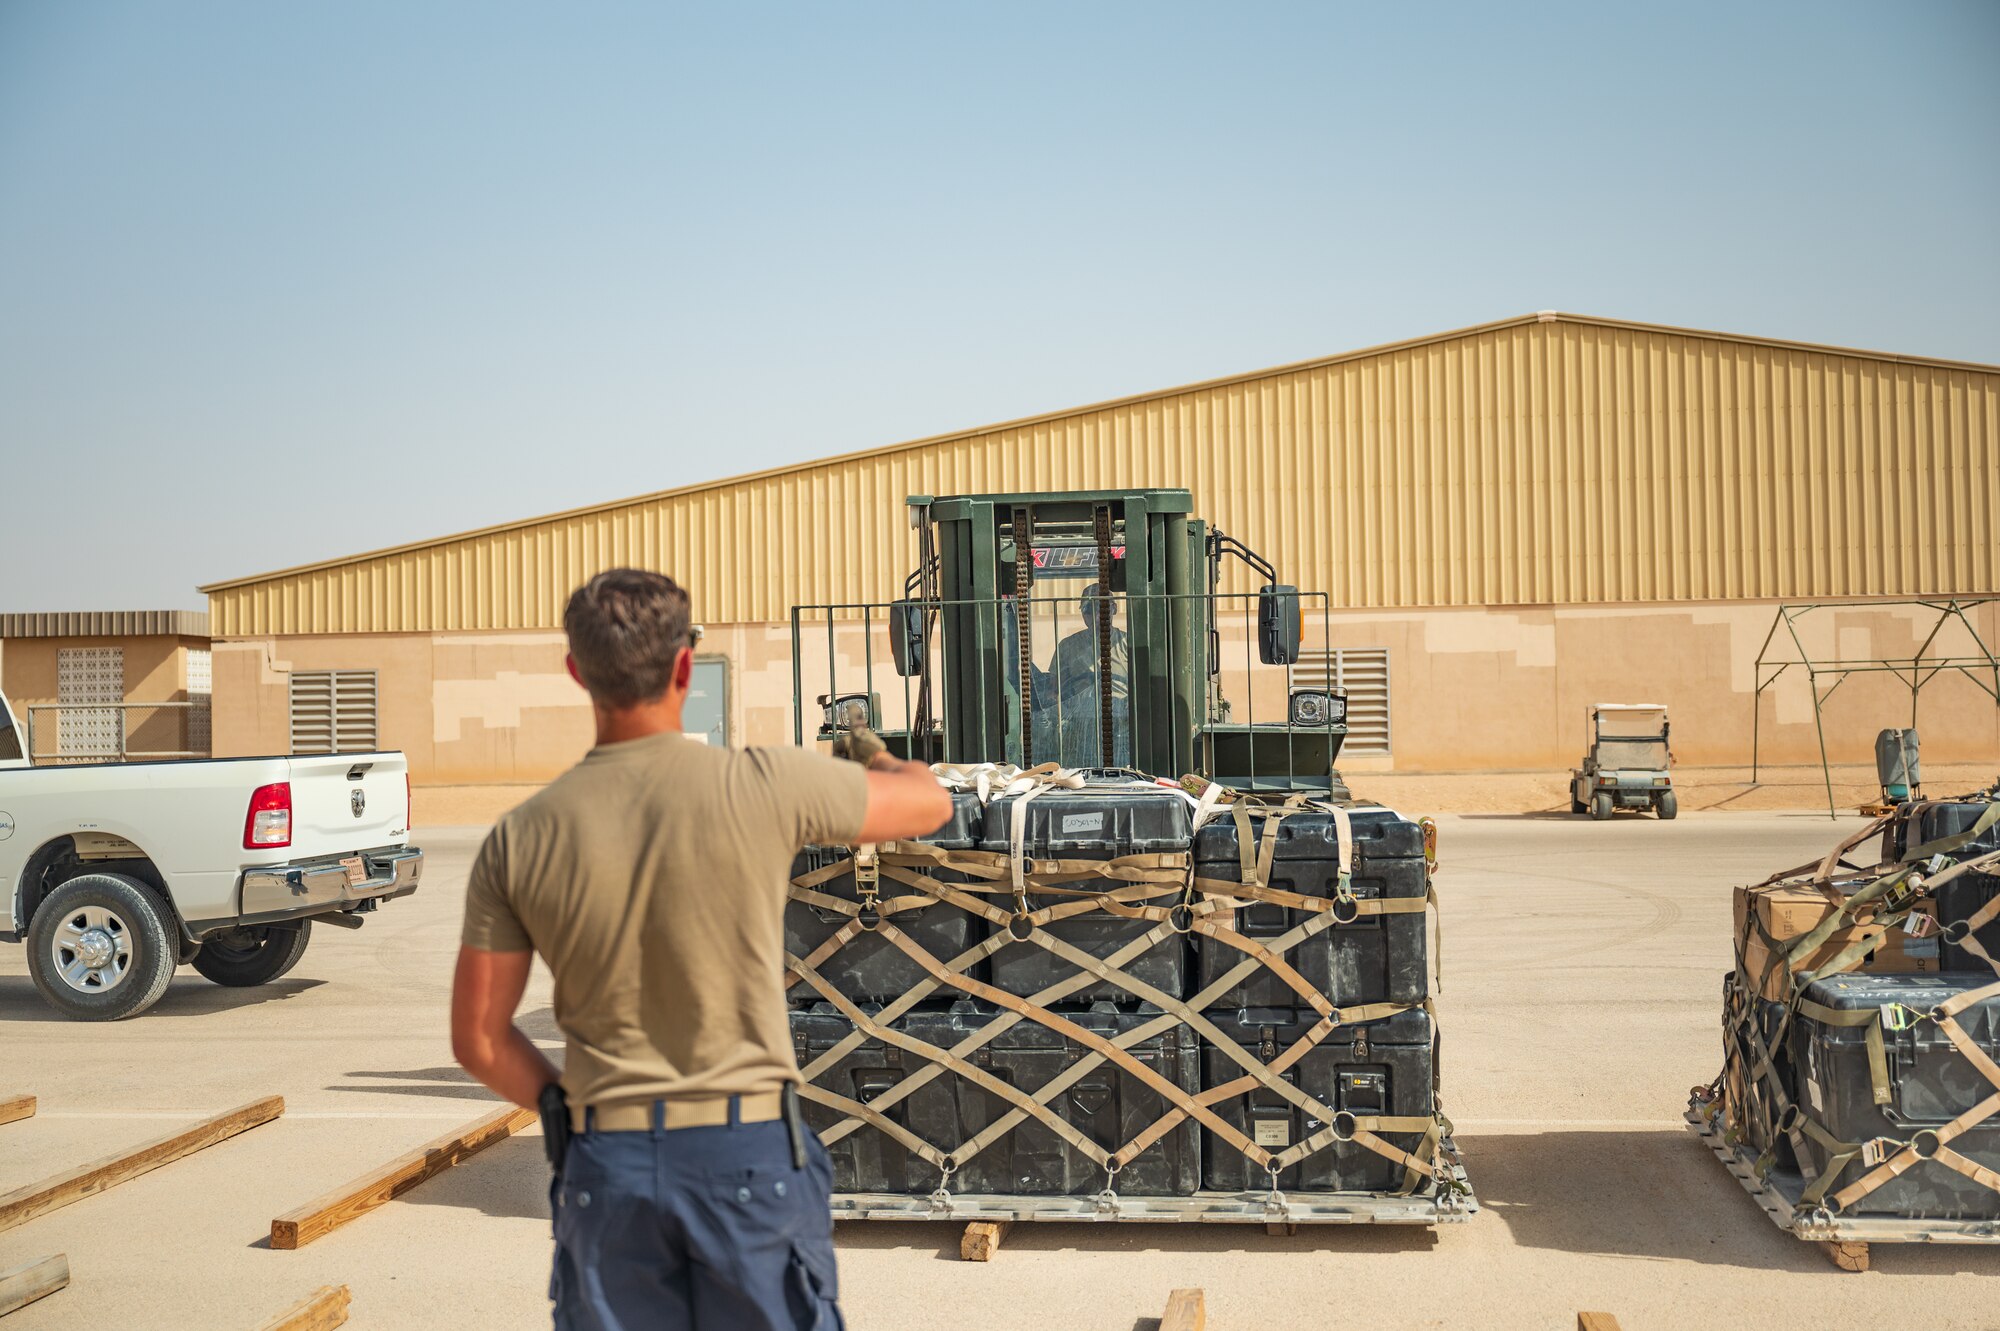 U.S. Air Force Airmen from the 379th Air Expeditionary Wing move a pallet of cargo to its shipping lane in preparation for inspection and loading onto a departing flight during exercise Accurate Test 22 at Thumrait Air Base, Oman, May 22, 2022. The Airmen worked together to guide the pallet on the forklift into position to ensure proper balance on the wooden beams in the shipping lane. (U.S. Air Force photo by Staff Sgt. Dana Tourtellotte)